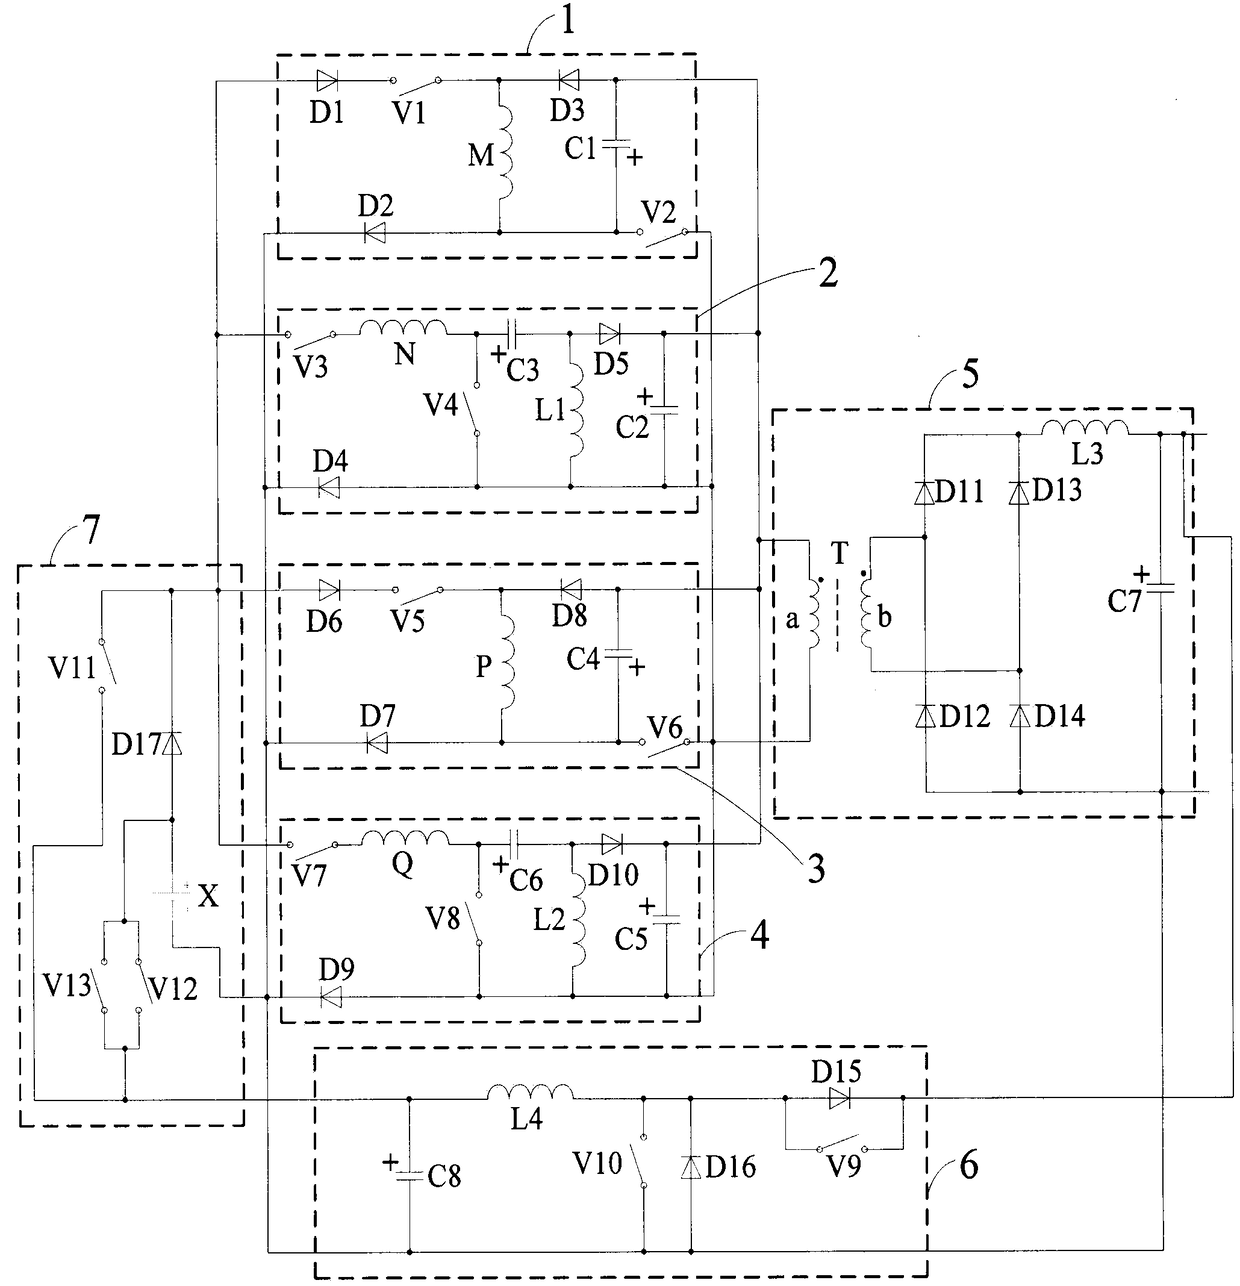 Small-sized switched reluctance motor converter system